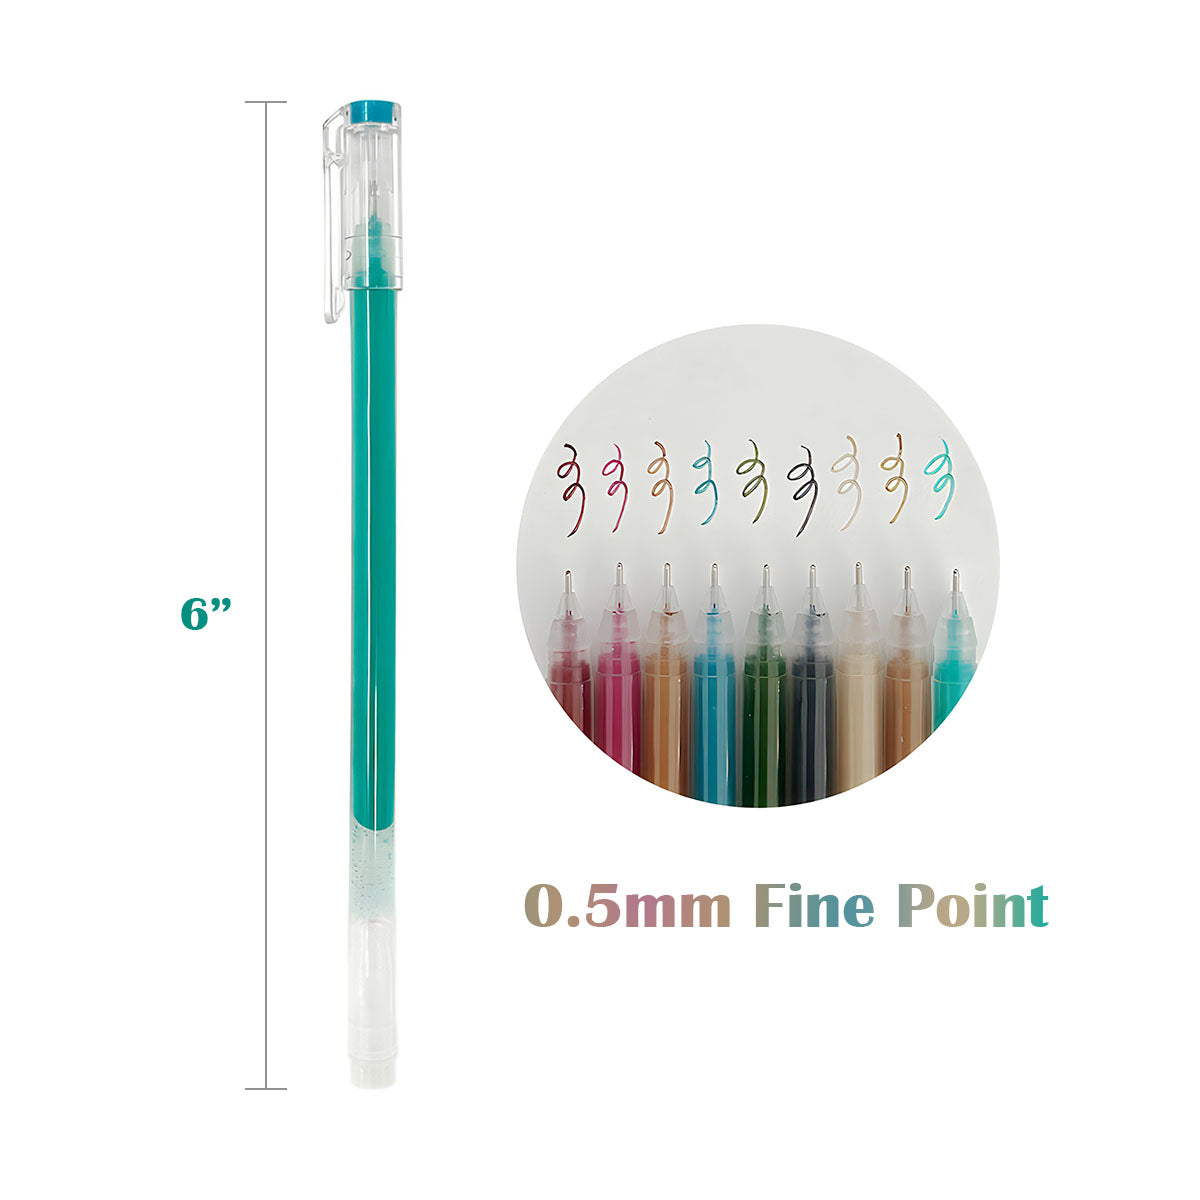 Wrapables Colorful Gel Ink Pens, 0.5mm Fine Point, for Home, Office, Stationery (Set of 9) Cool